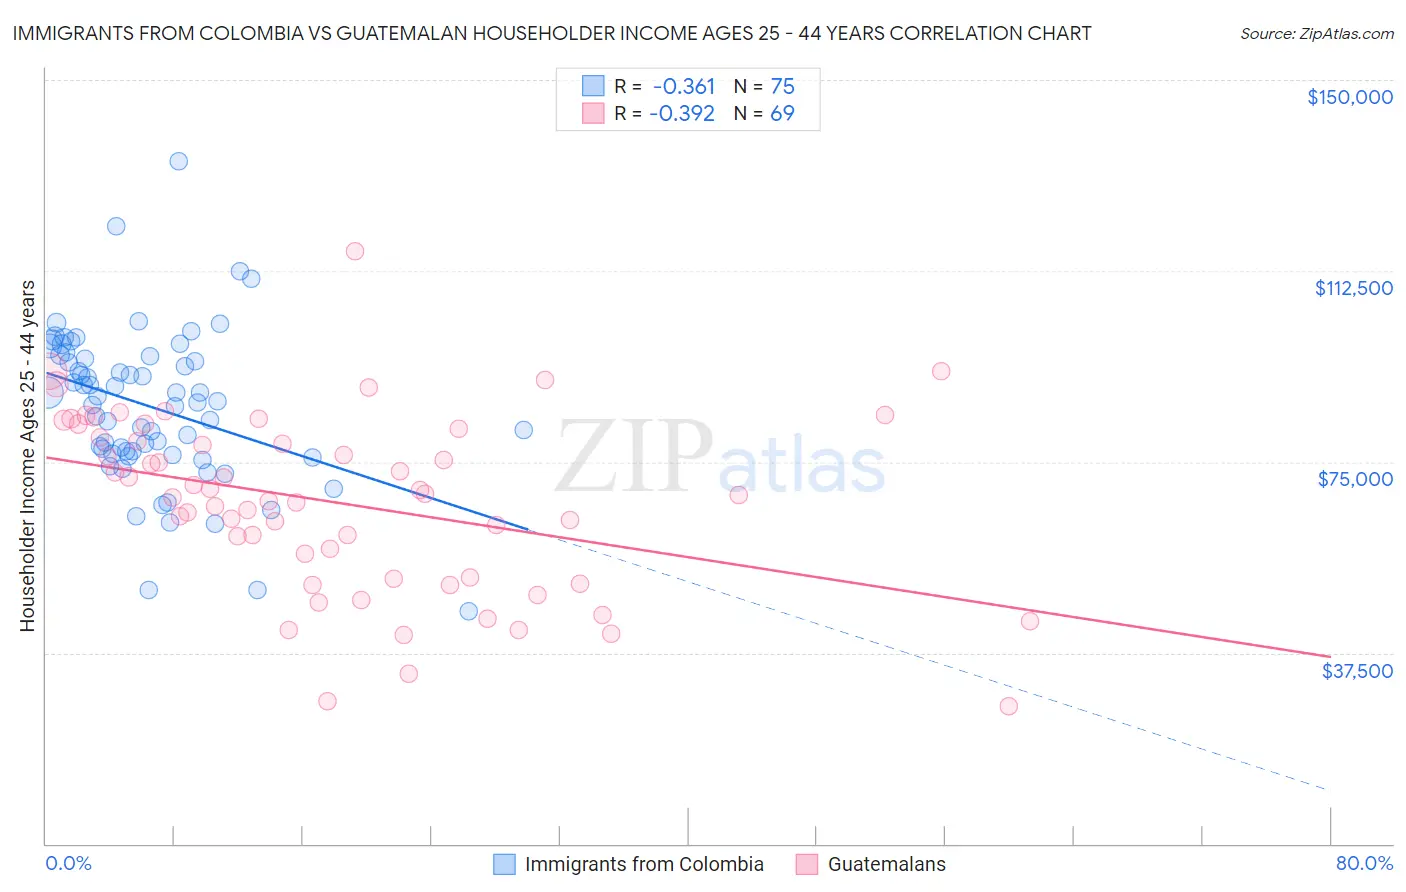 Immigrants from Colombia vs Guatemalan Householder Income Ages 25 - 44 years